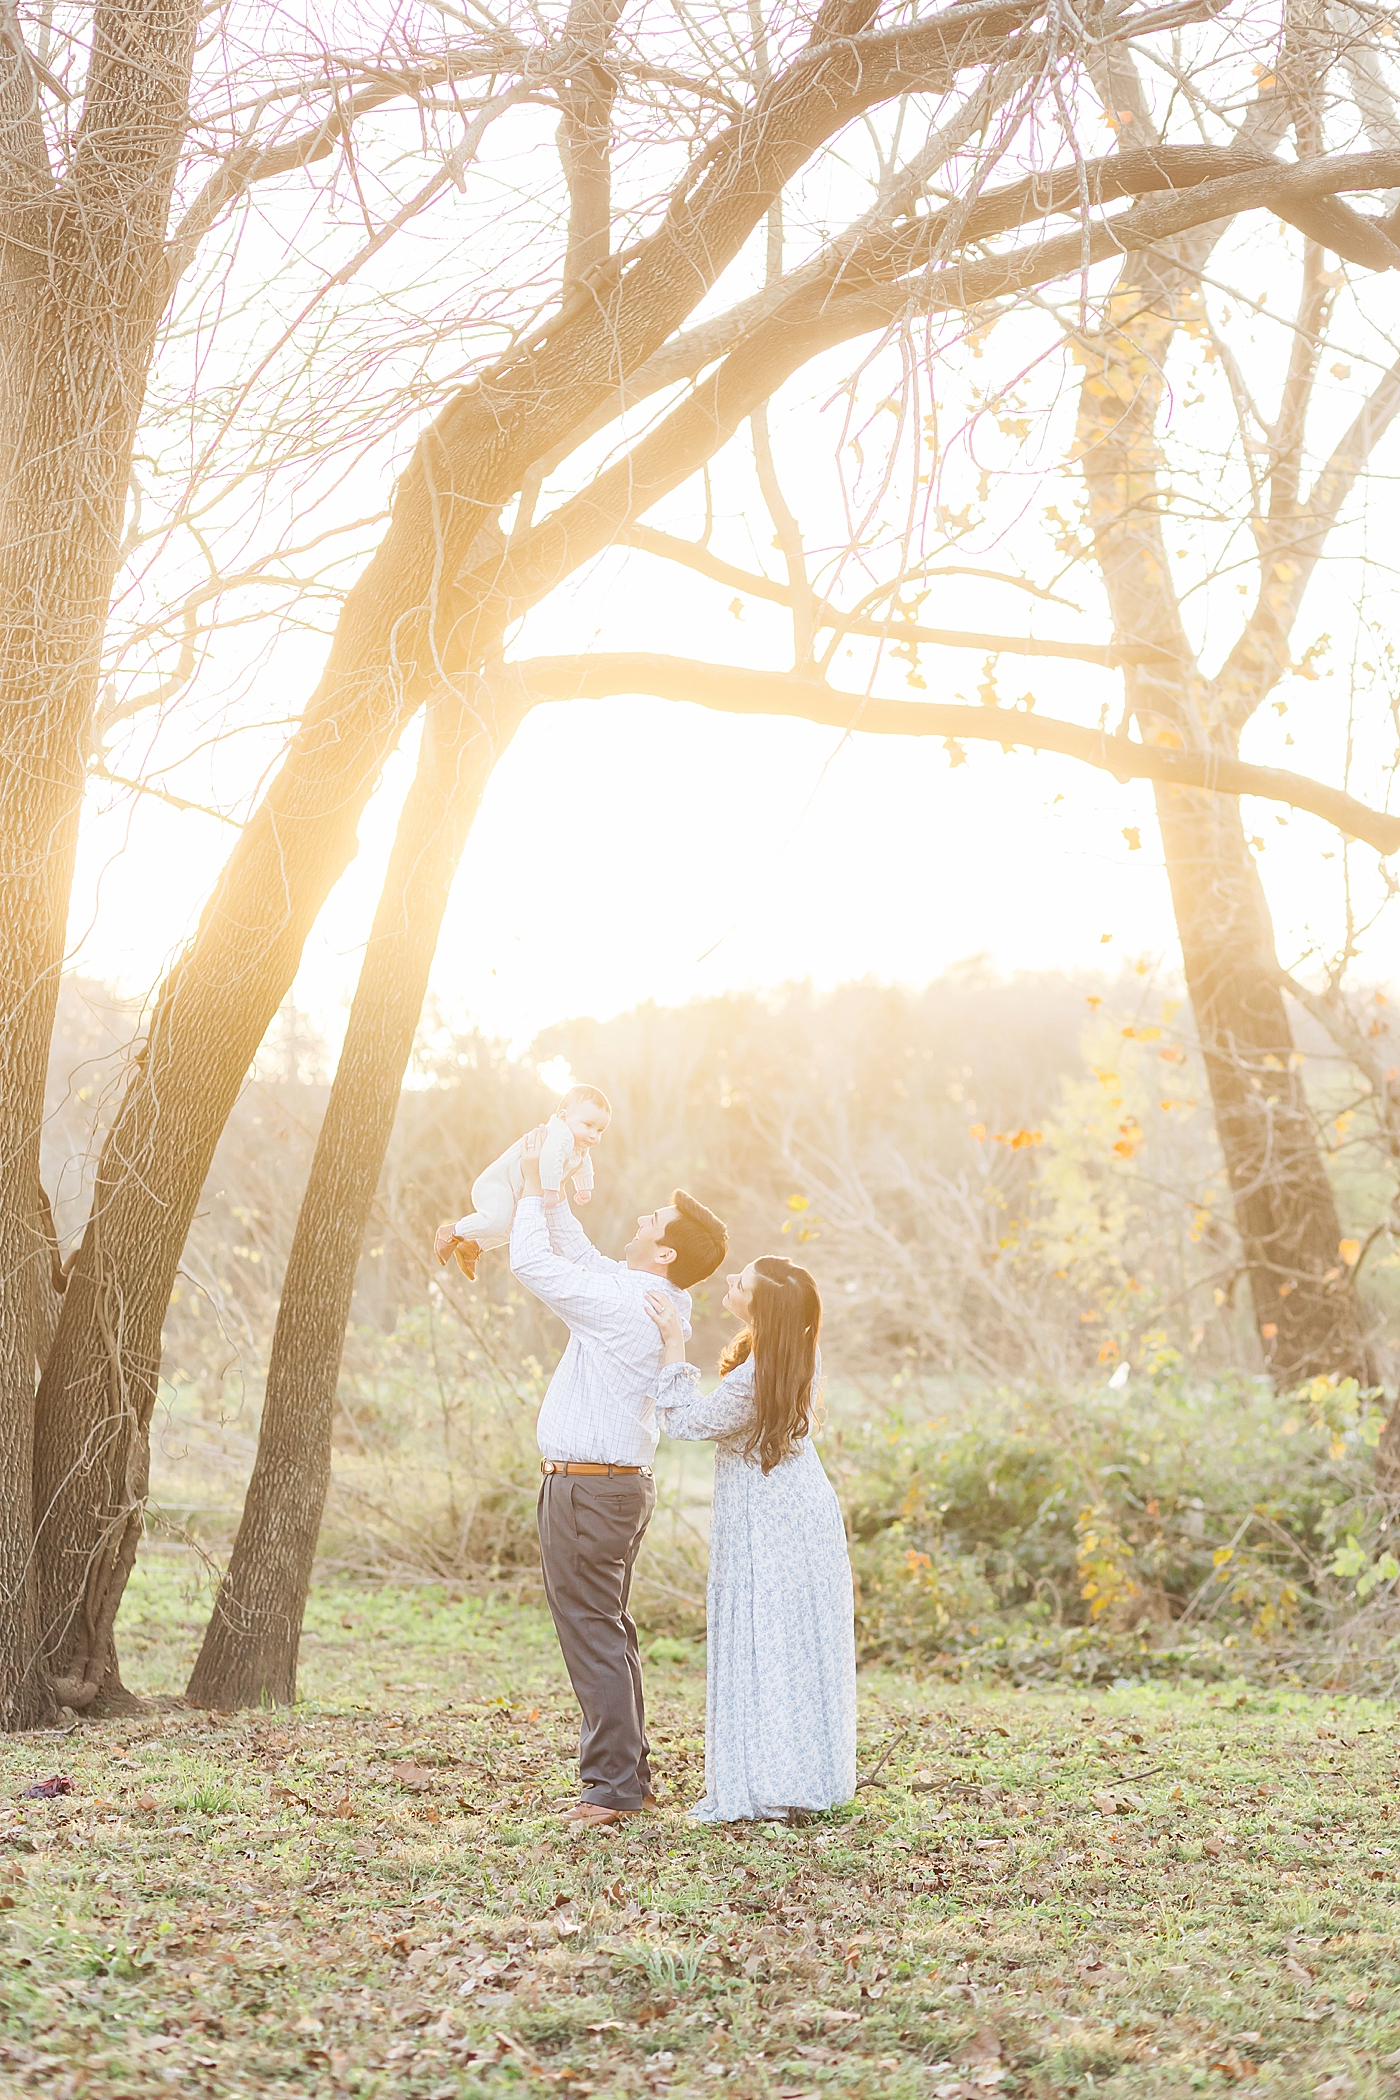 Golden hour light at sunset during family photoshoot. Photo by Fresh Light Photography.